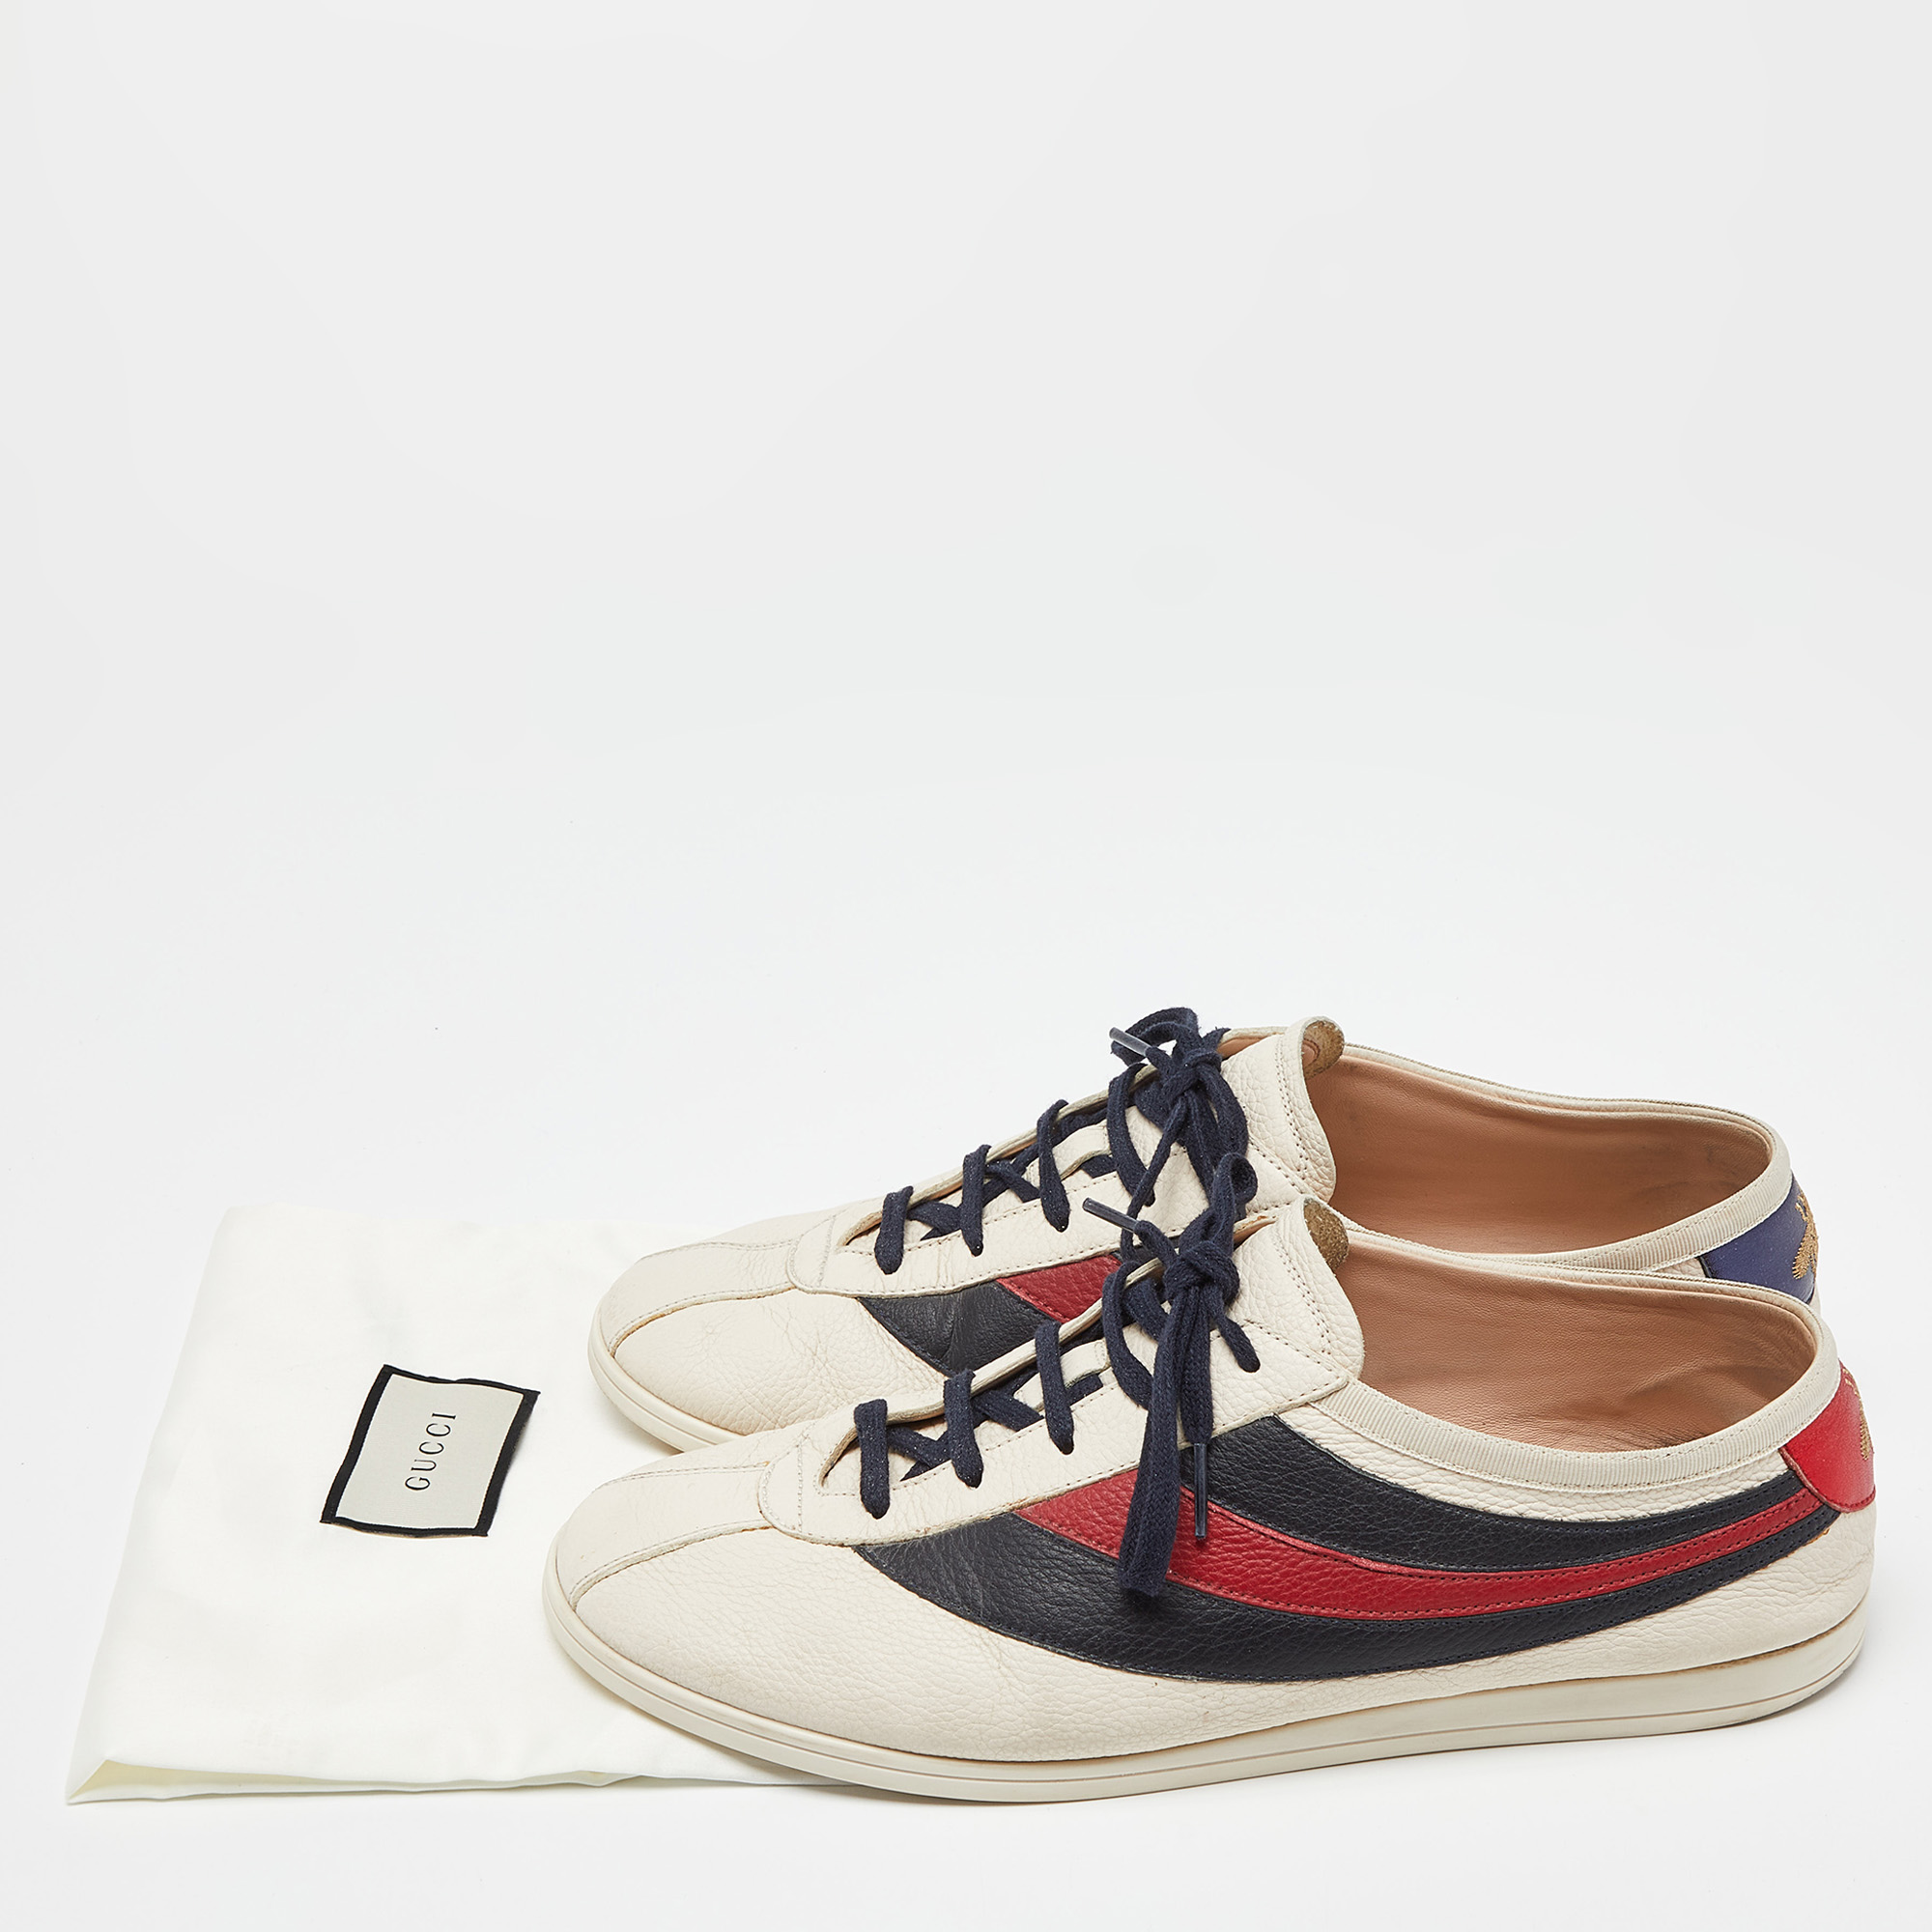 Gucci Tri Color Leather Web Detail Low Top Sneakers Size 44